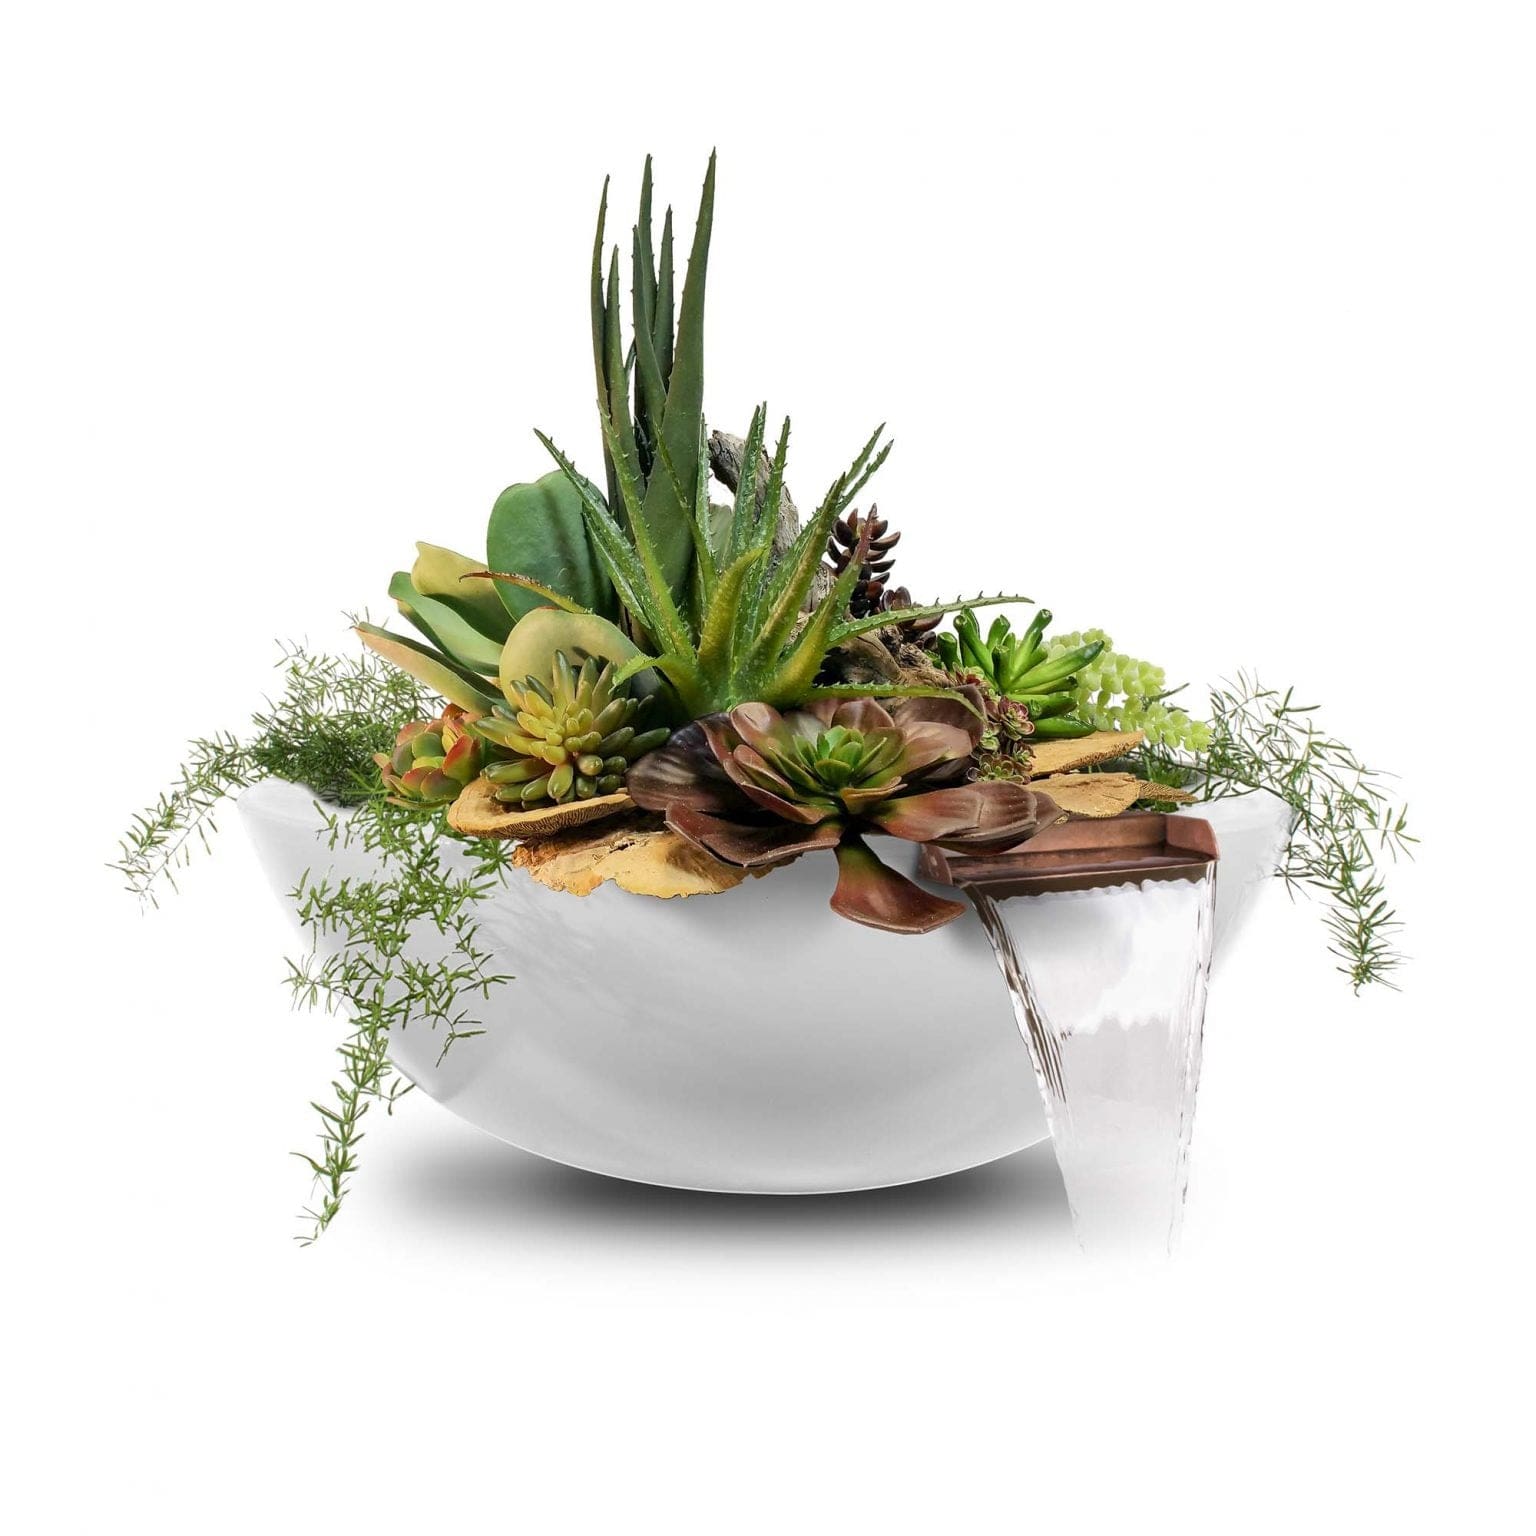 The Outdoor Plus Planter & Water Bowls The Outdoor Plus Sedona Planter & Water Bowl | GFRC Concrete